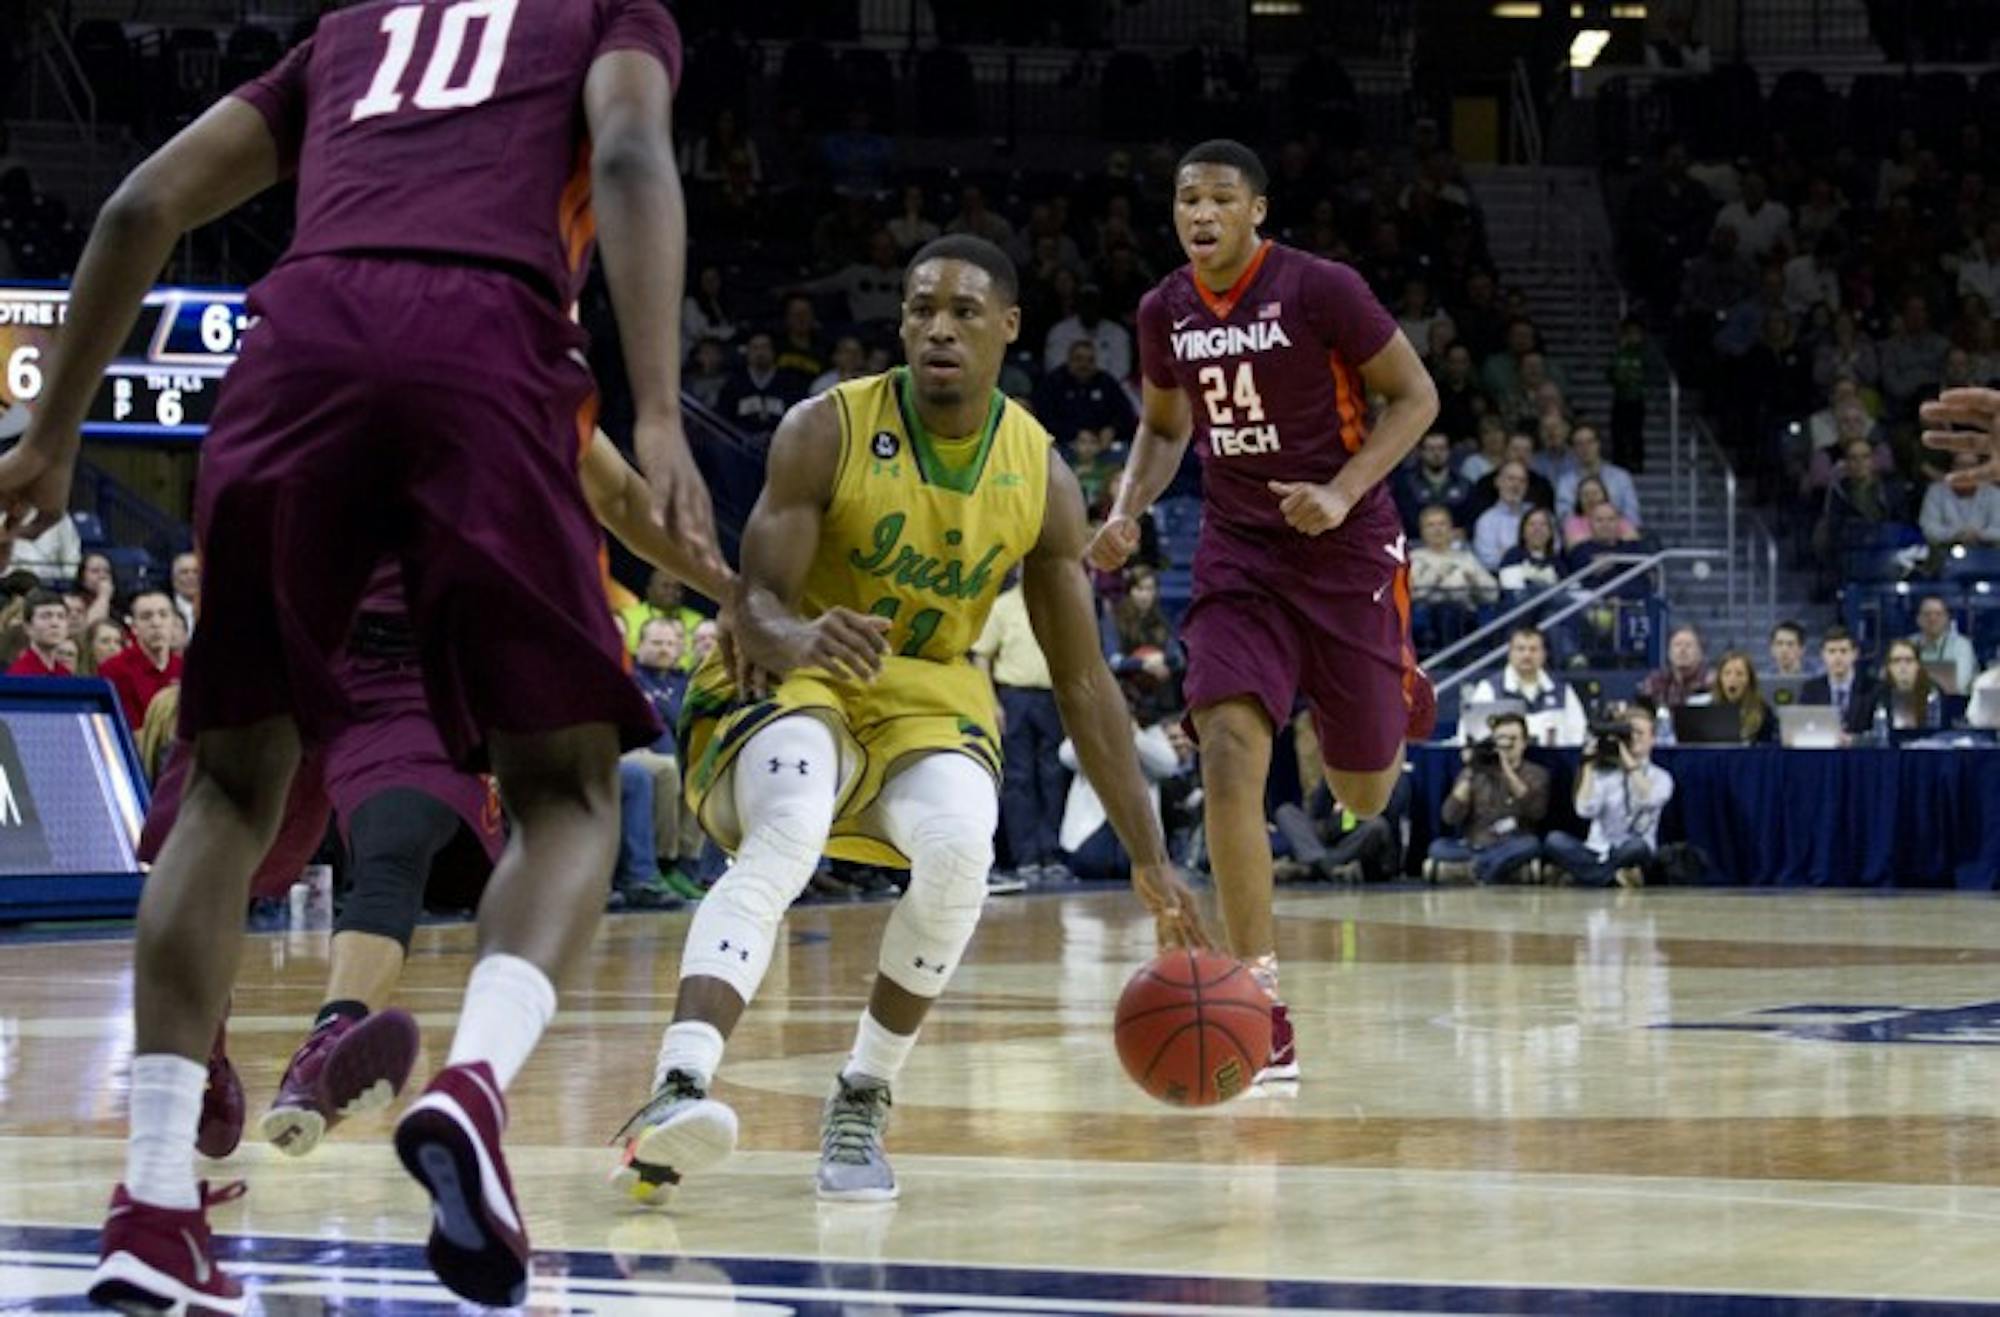 Former Irish guard Demetrius Jackson dribbles up the court during a 83-81 victory against Virginia Tech on Jan. 20. Jackson recently signed a rookie contract with the Boston Celtics.